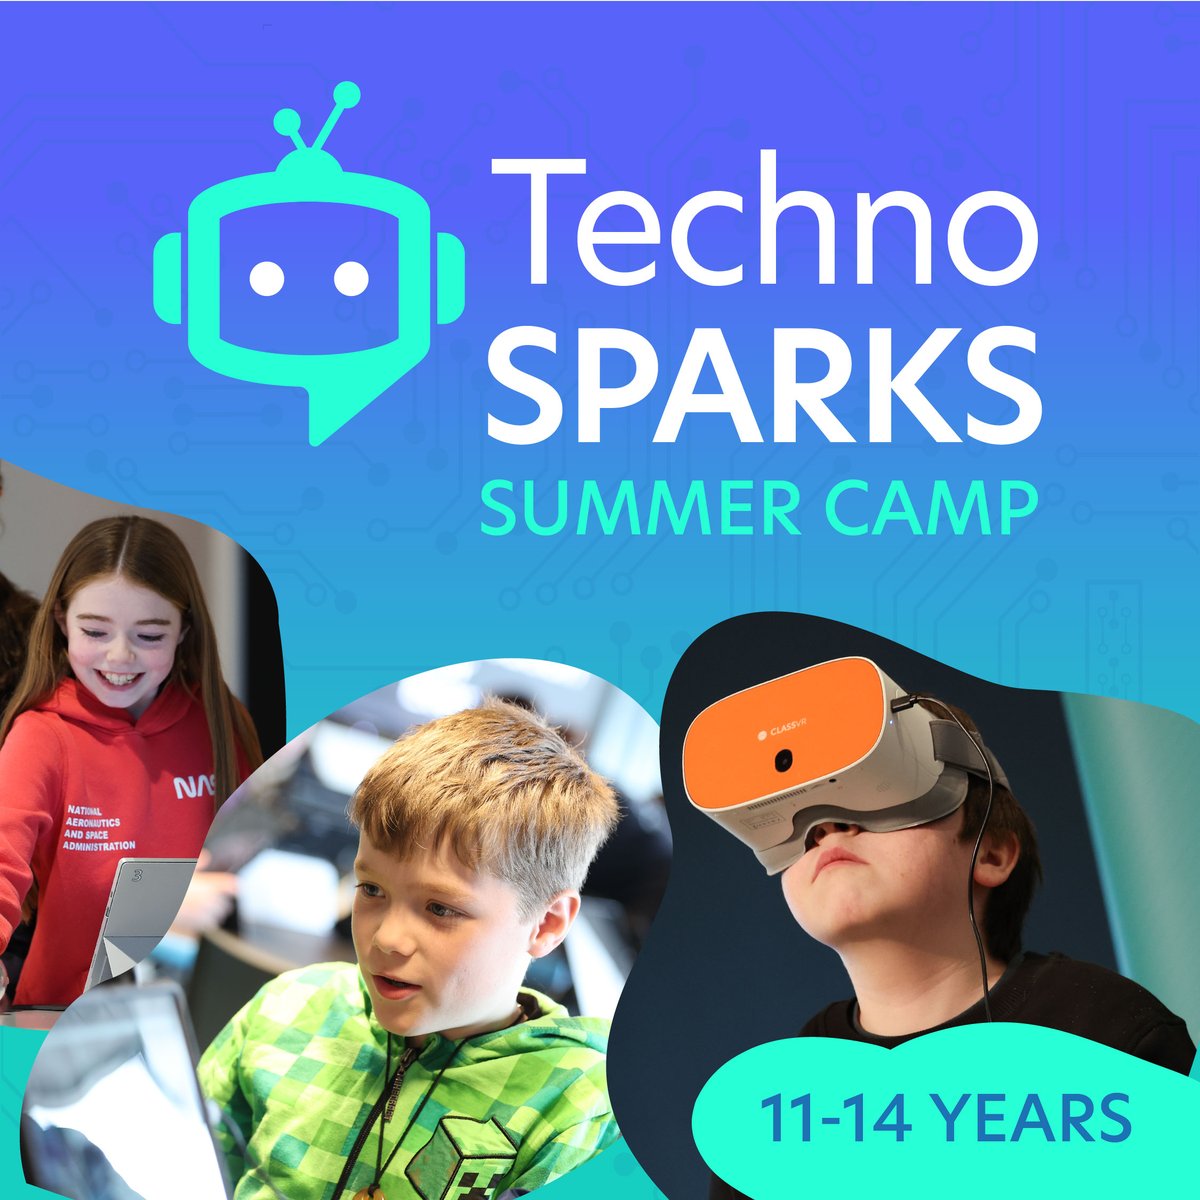 ⚡️ Spark your creativity at W5 LIFE’s Techno Sparks Summer Camp! This hands-on summer camp for 11-14 year olds is the perfect way to keep young minds curious over the holidays. ☀️ 📆 Selected weeks in July and August 🔗 Find out MORE: bit.ly/TechnoSparks24